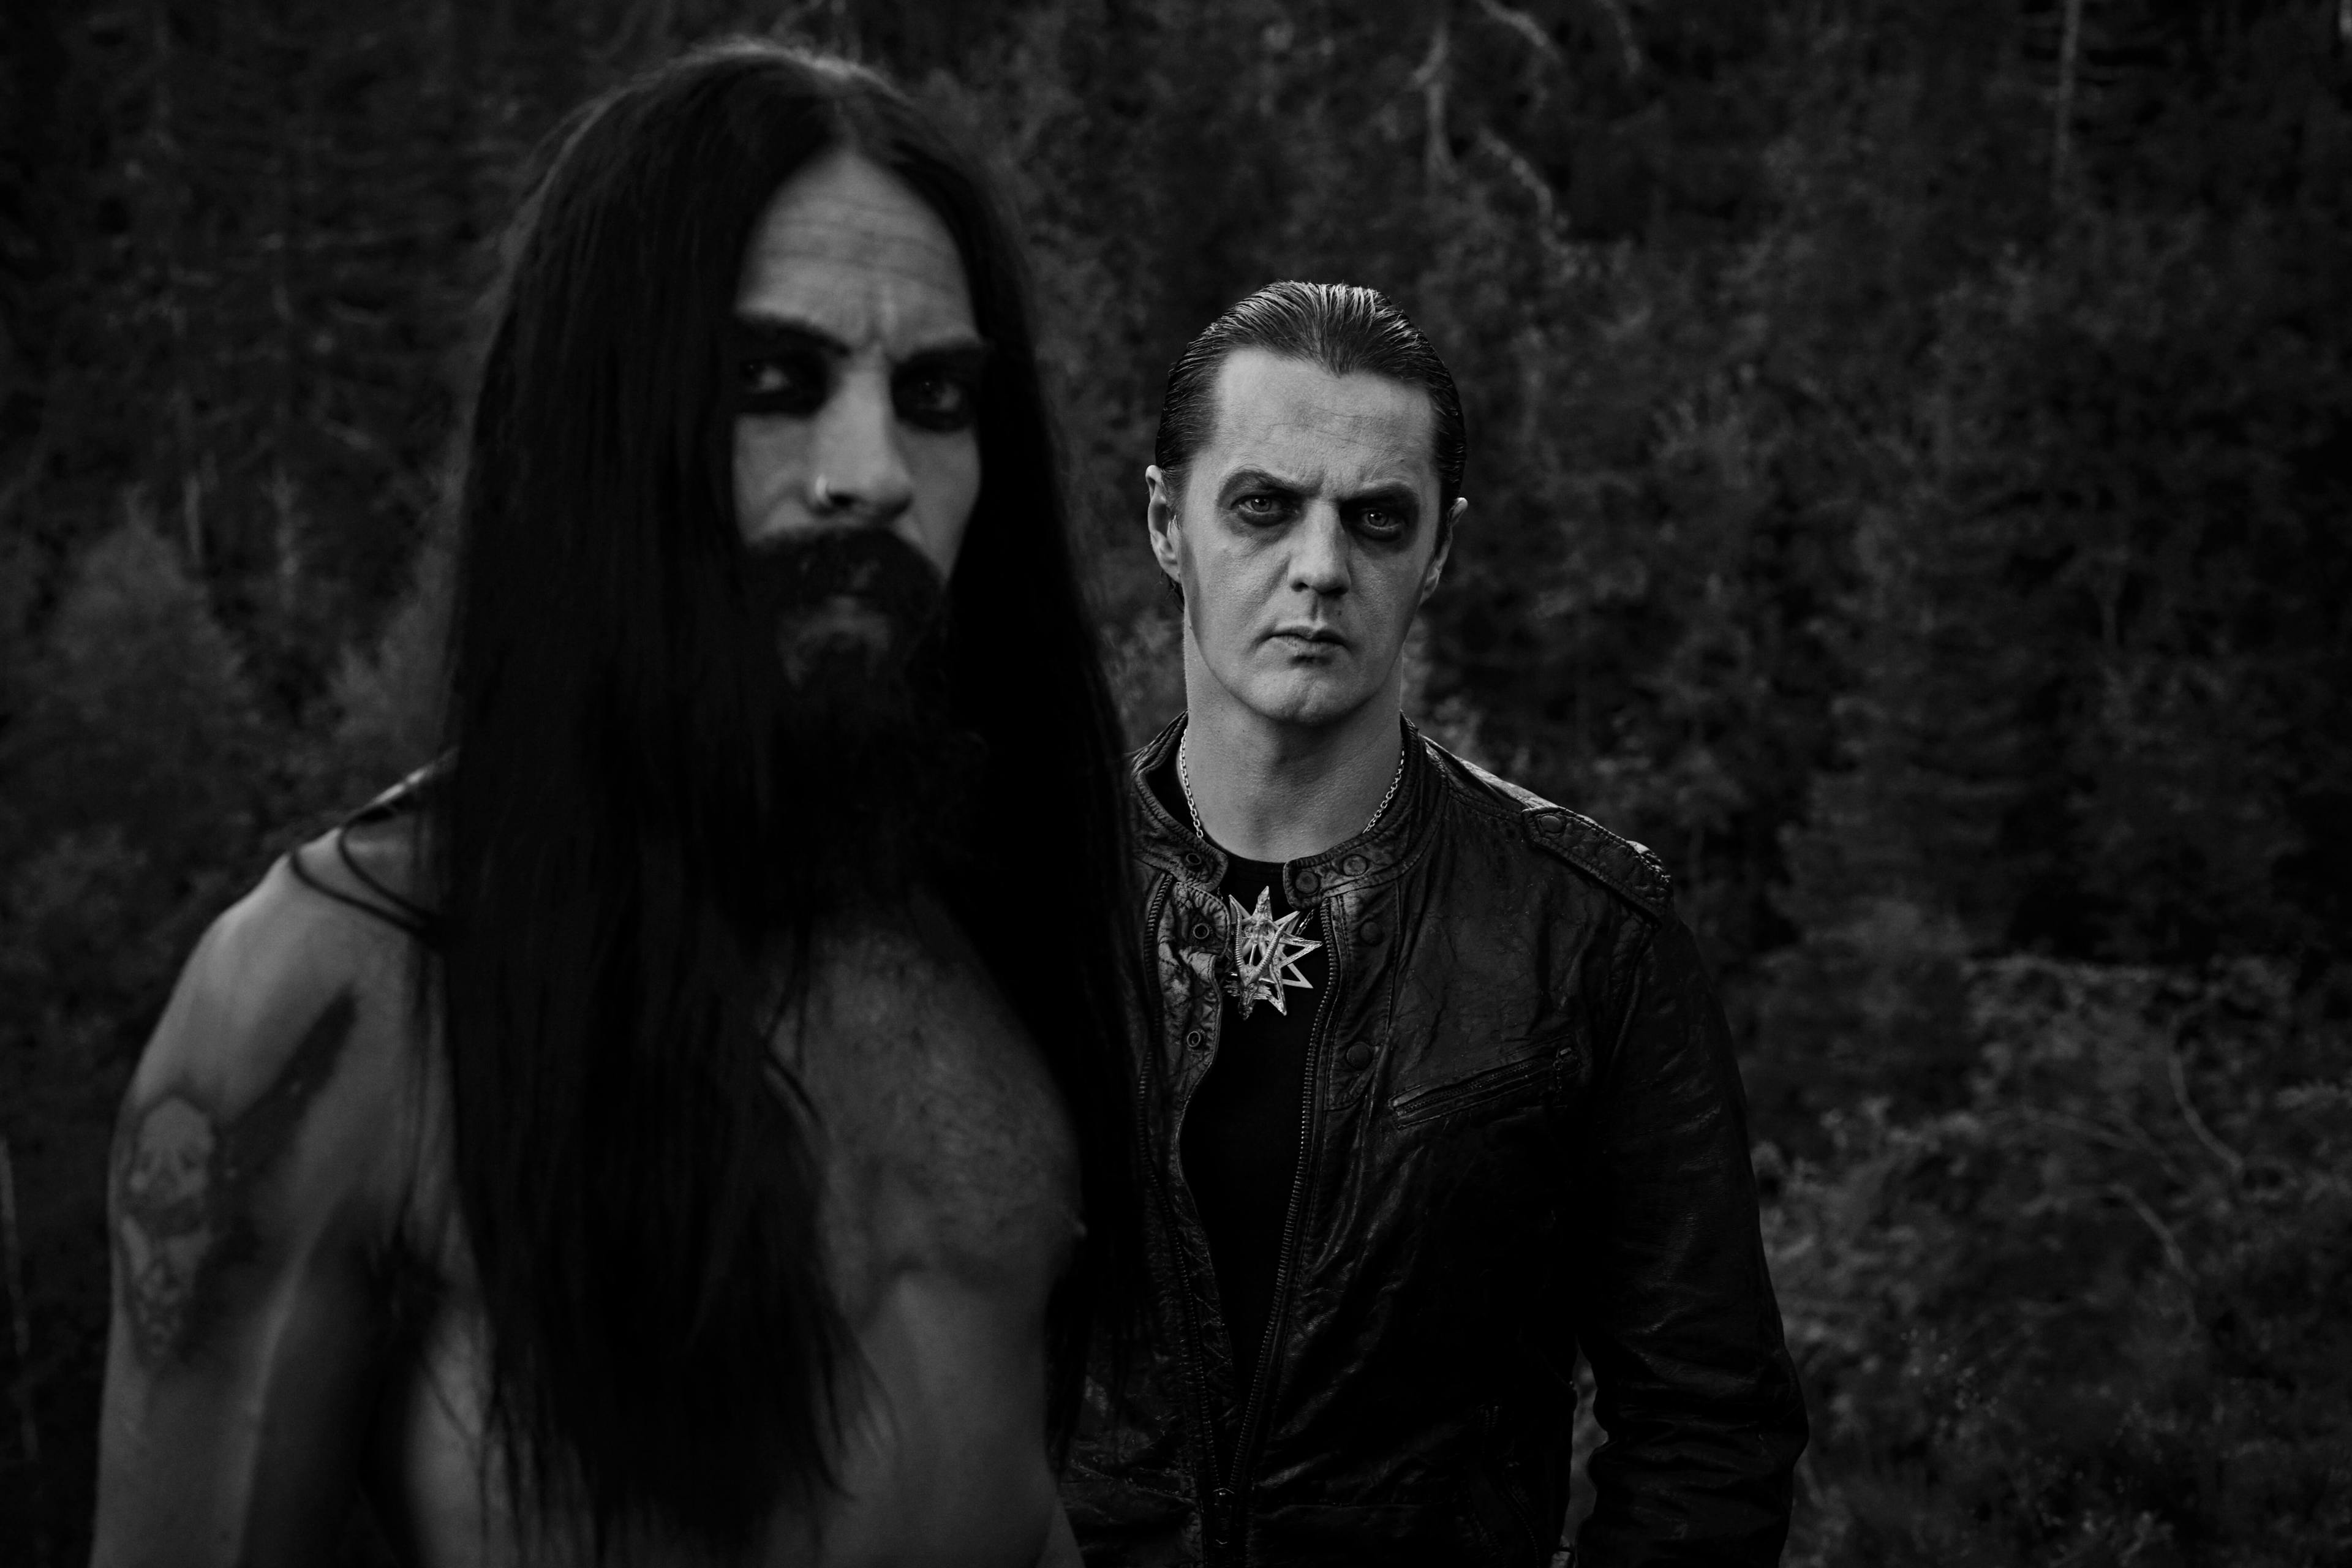 Satyricon: "This Is A New Beginning"